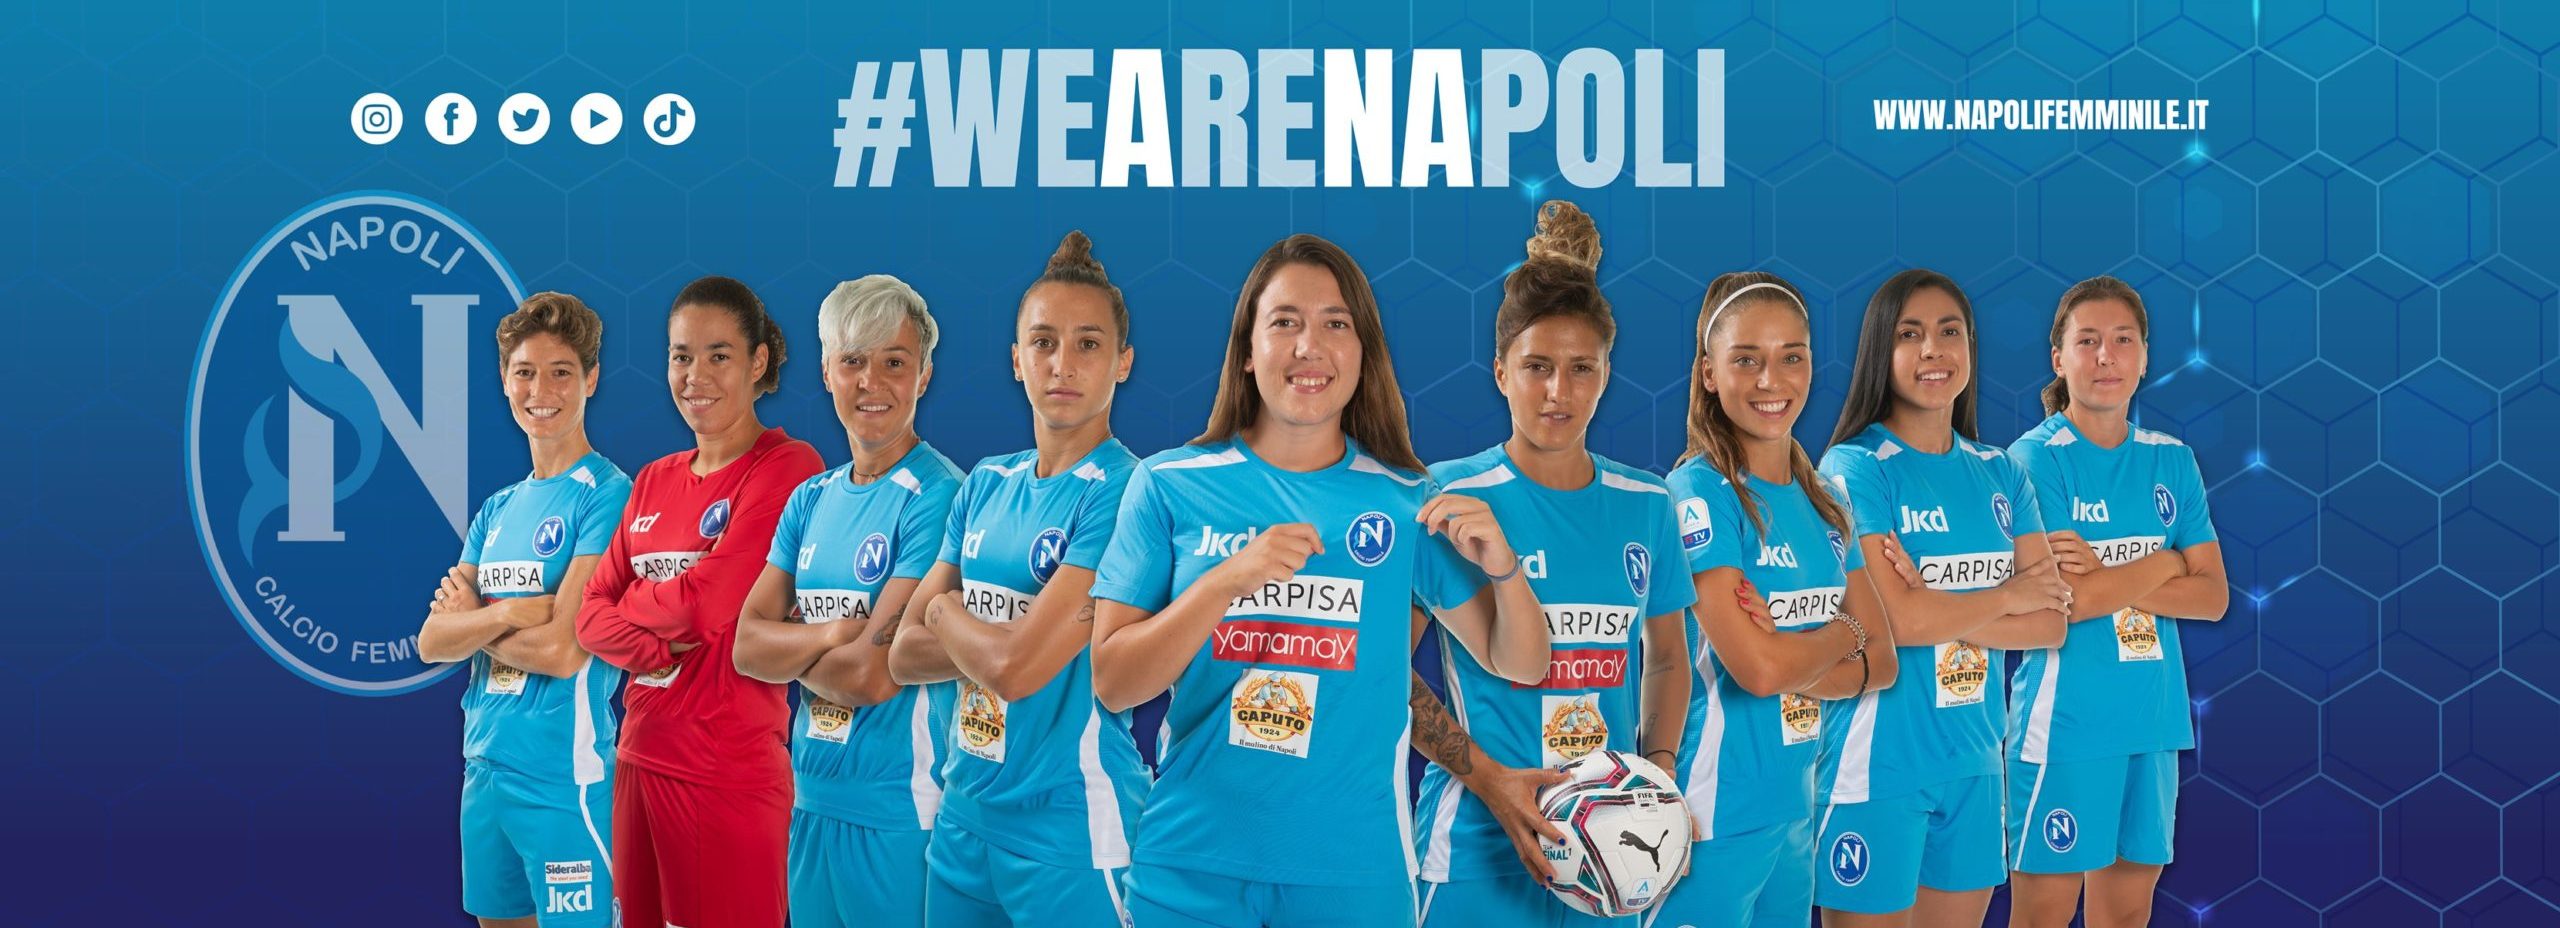 Napoli Femminile are living the dream of their first historic participation in the Serie A Femminile in this 2020-2021 season